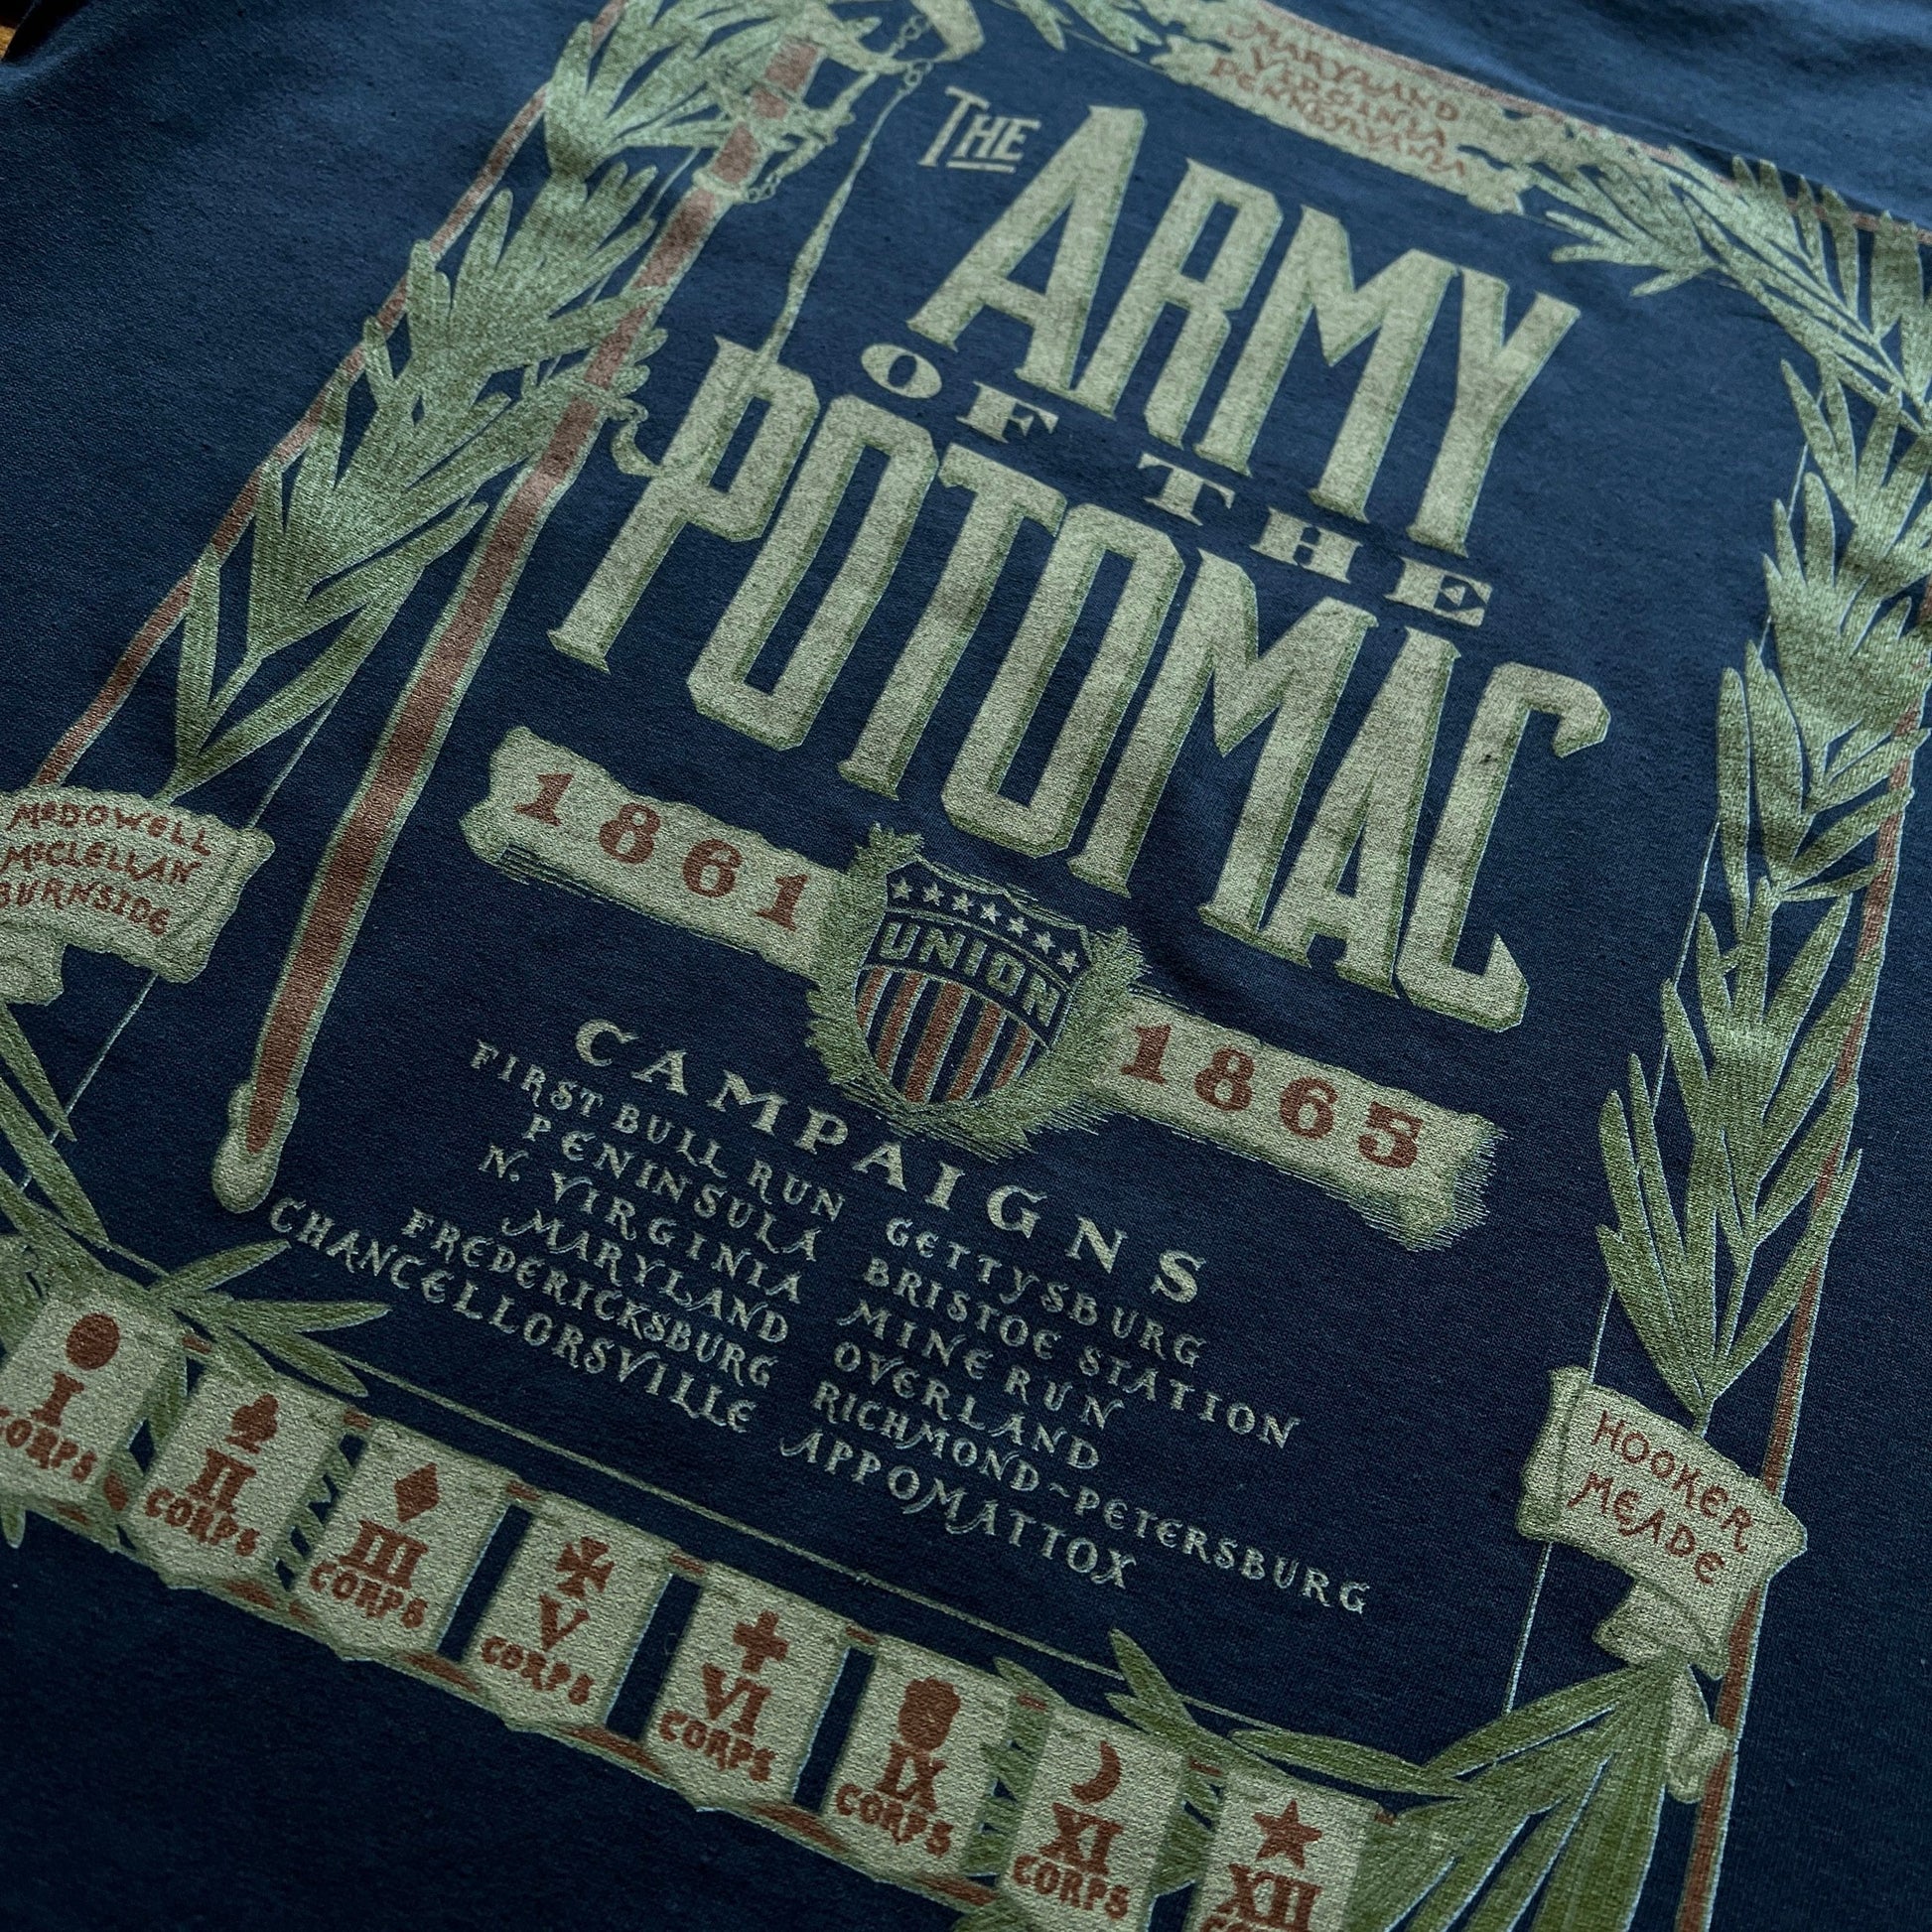 Back close-up of "The Army of the Potomac" Crewneck sweatshirt from The History List store